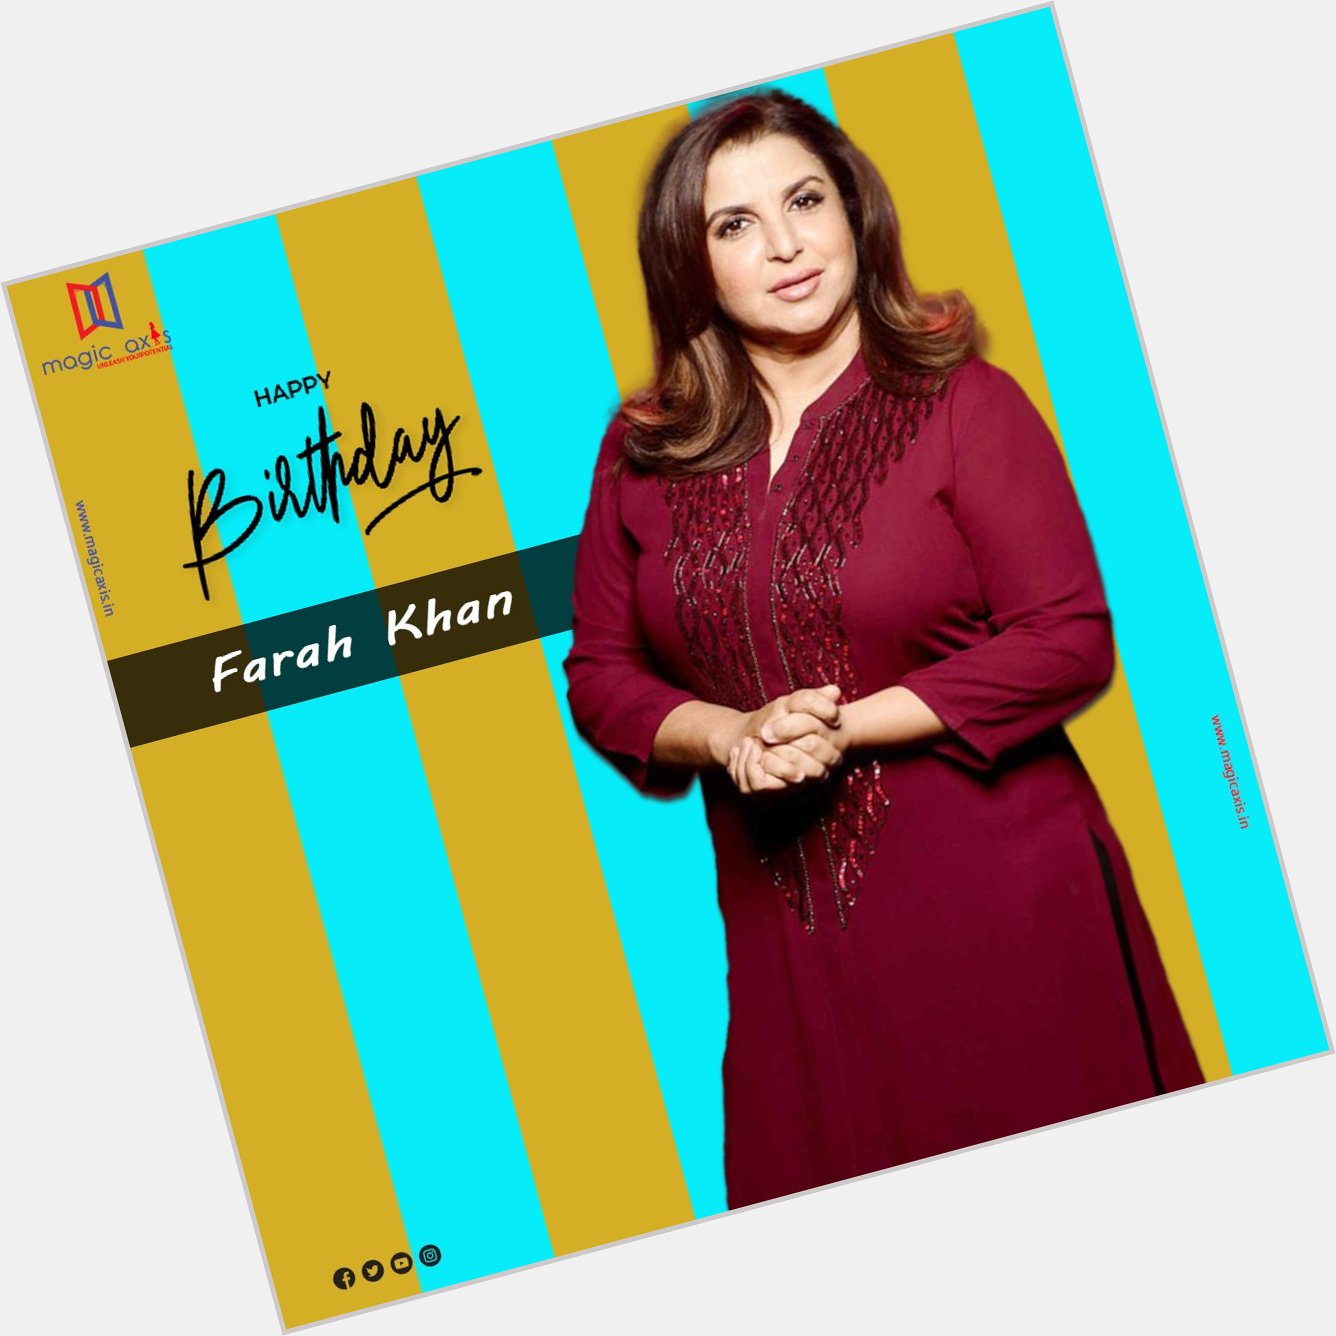 Happy birthday to one of the finest director and choreographer Farah khan!  